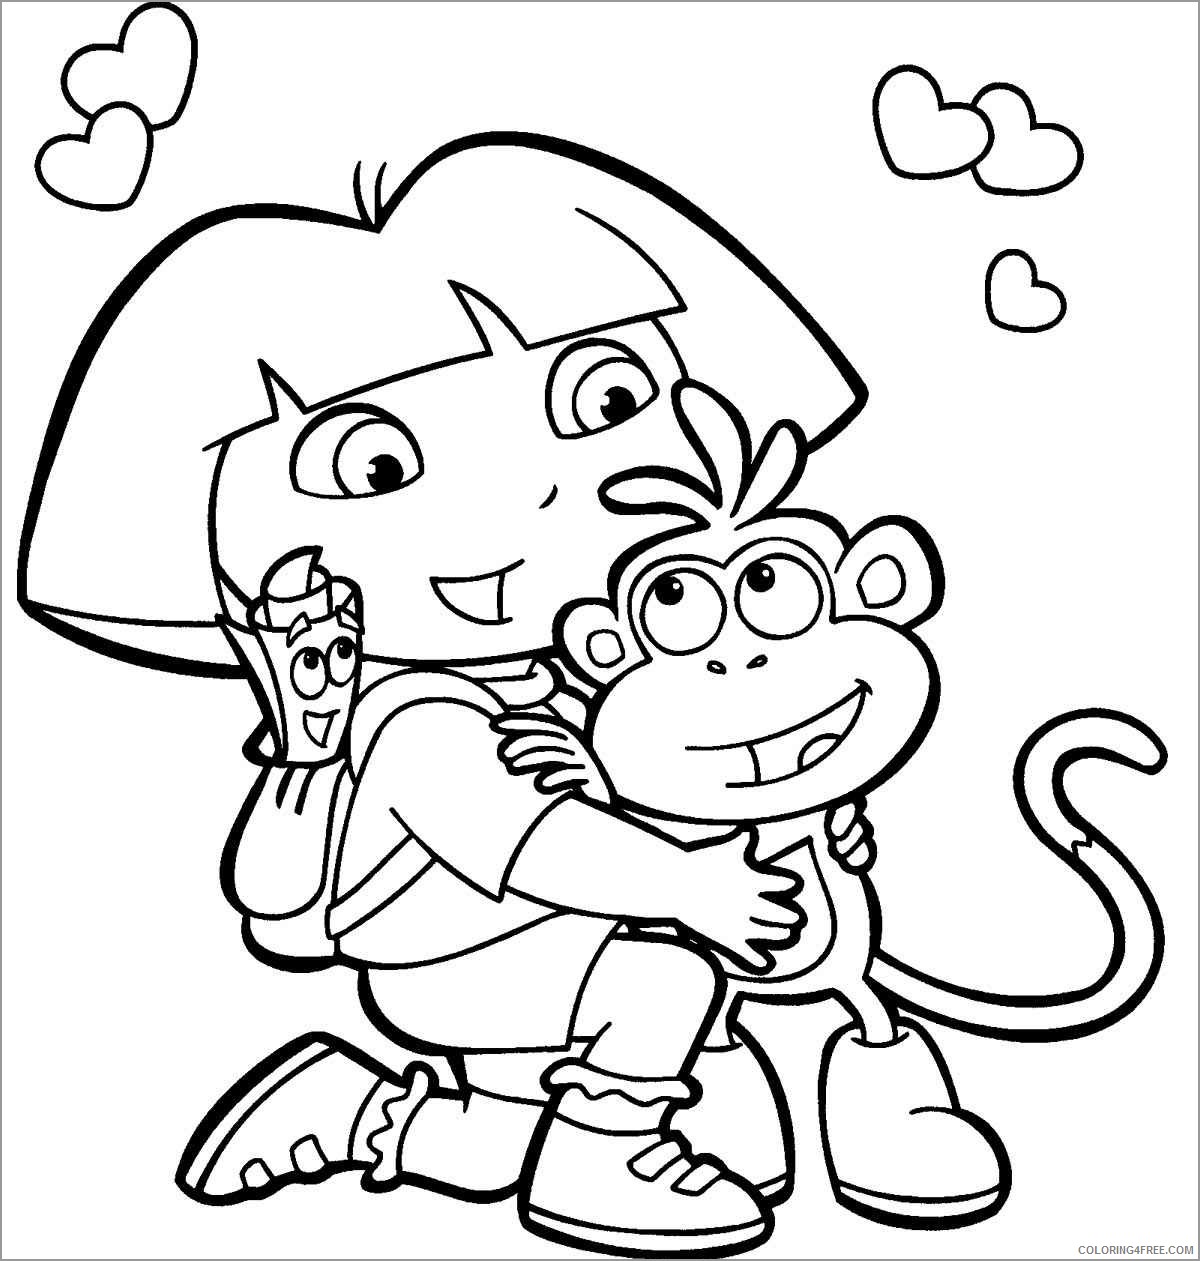 Dora the Explorer Coloring Pages Cartoons dora boots unsmushed Printable 2020 2644 Coloring4free